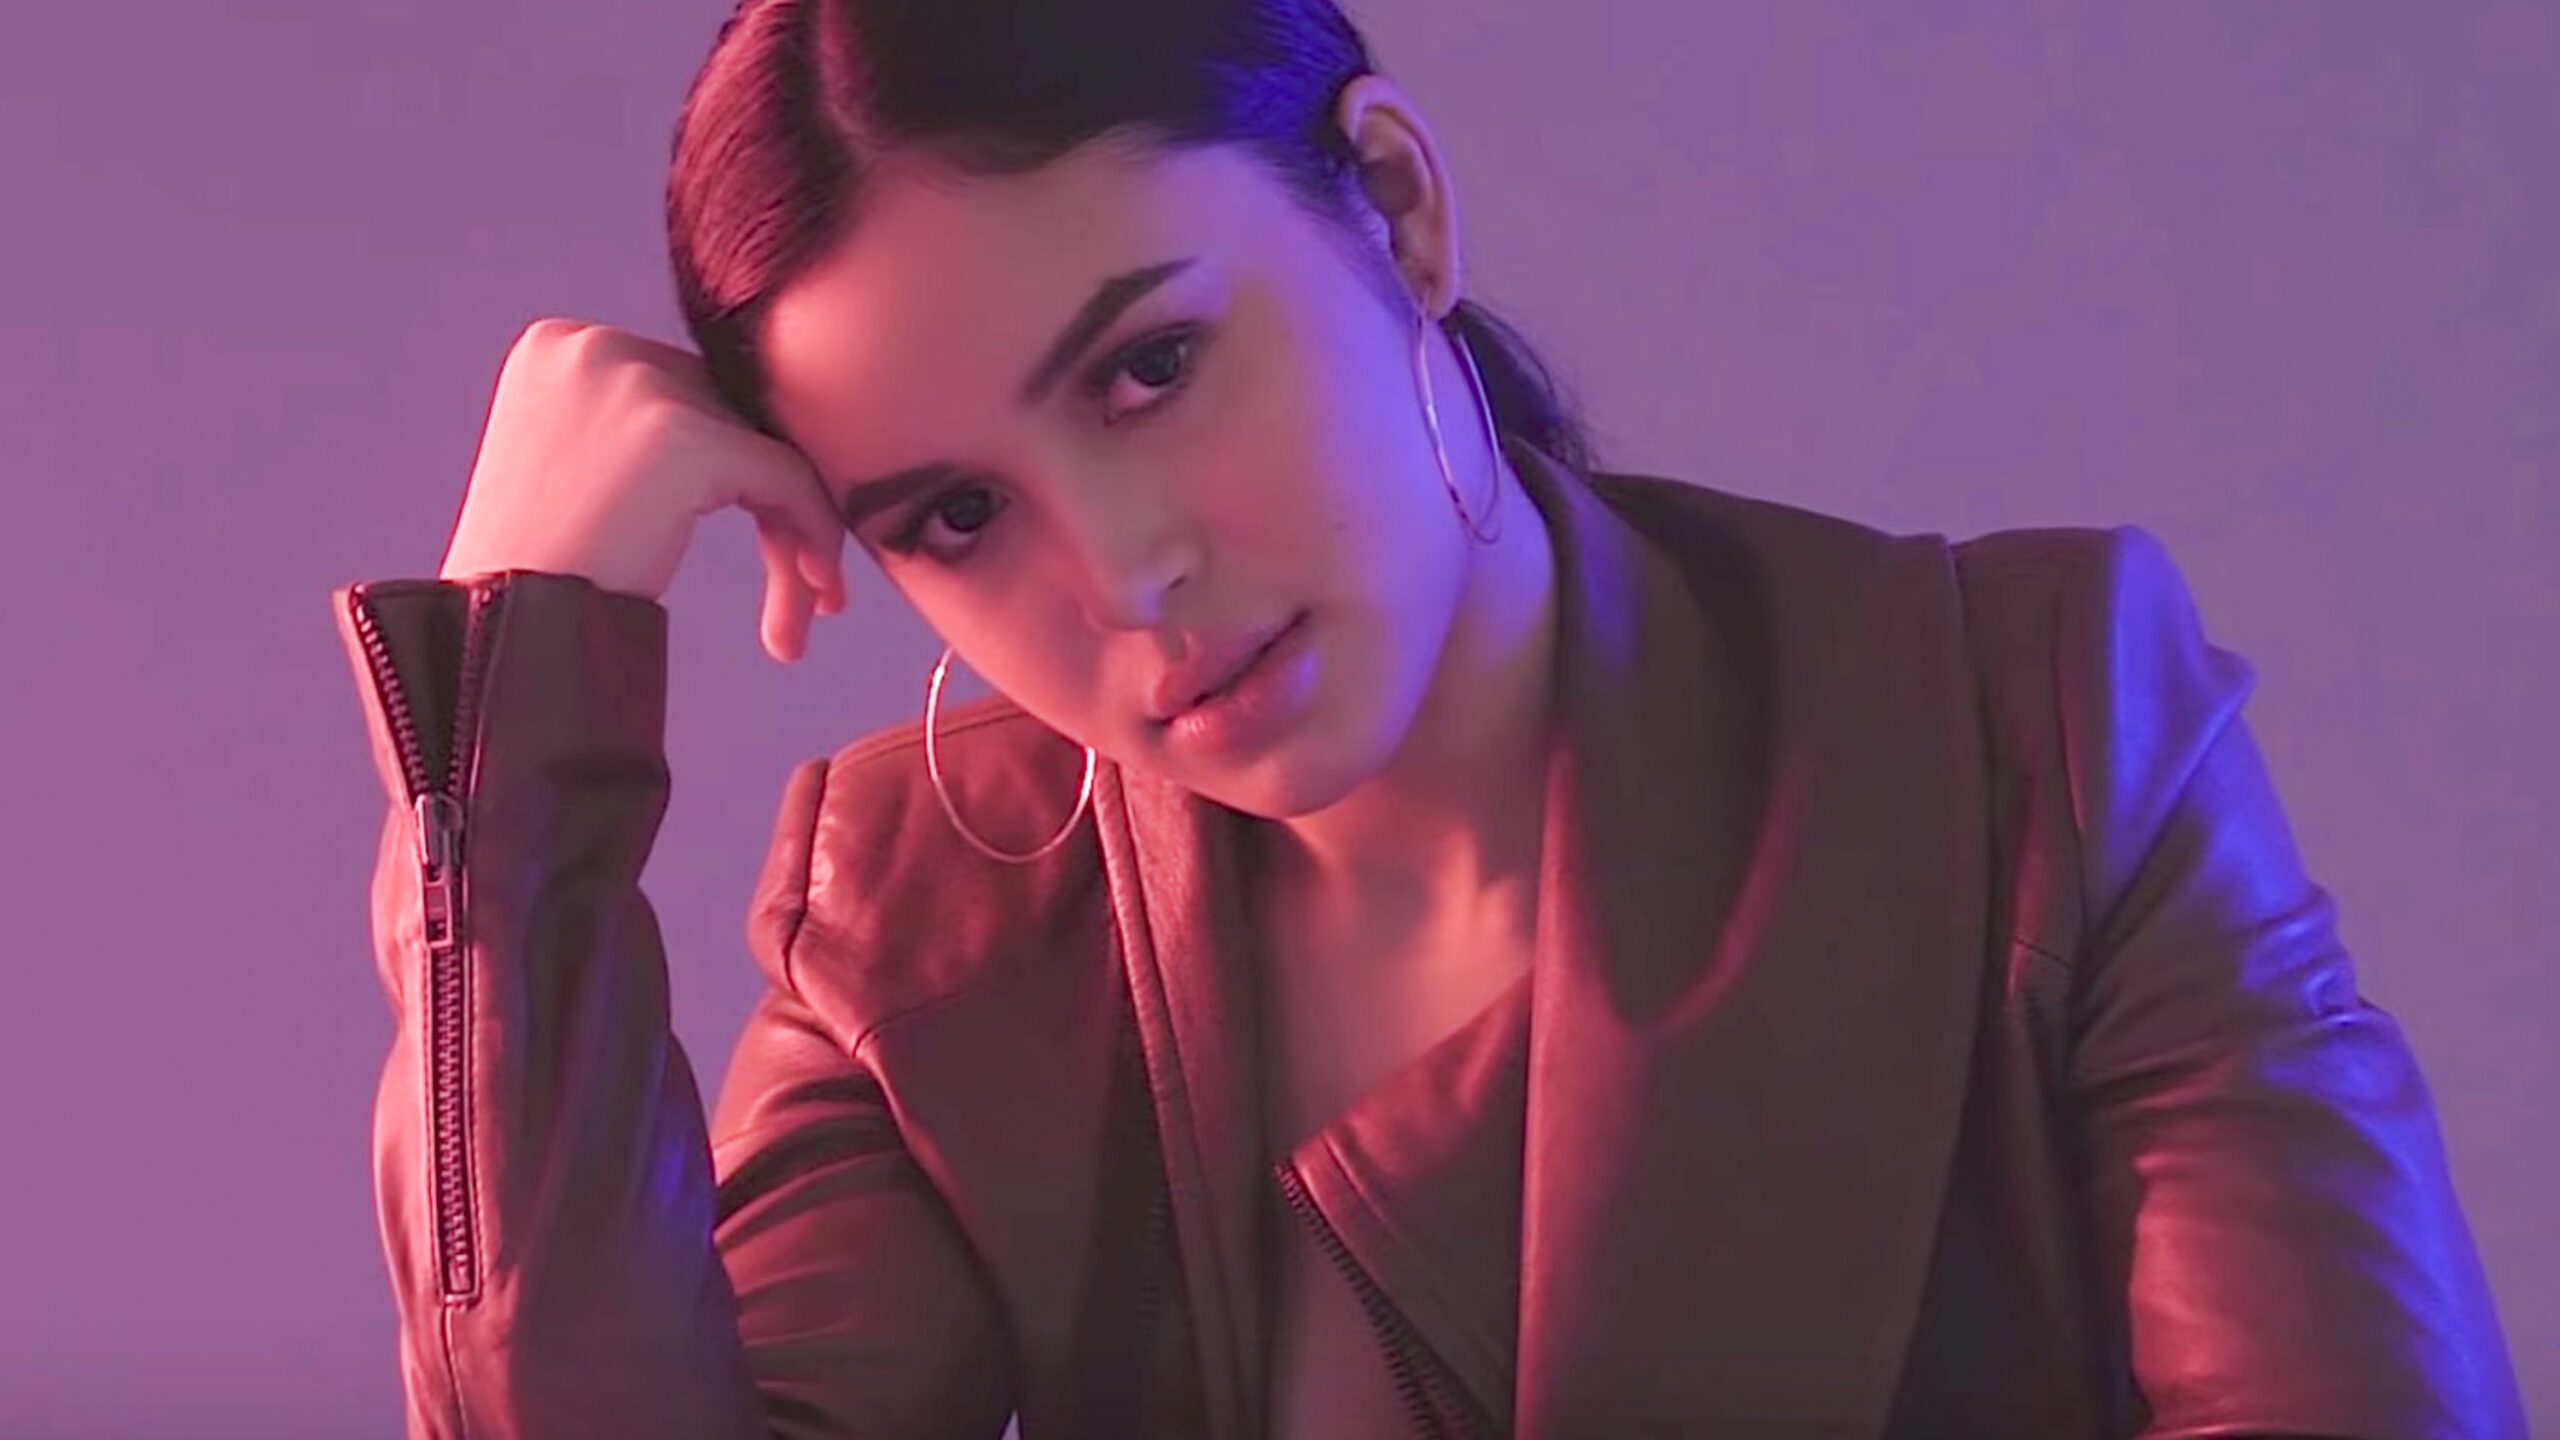 WATCH: Claudia Barretto’s ‘Stay’ music video